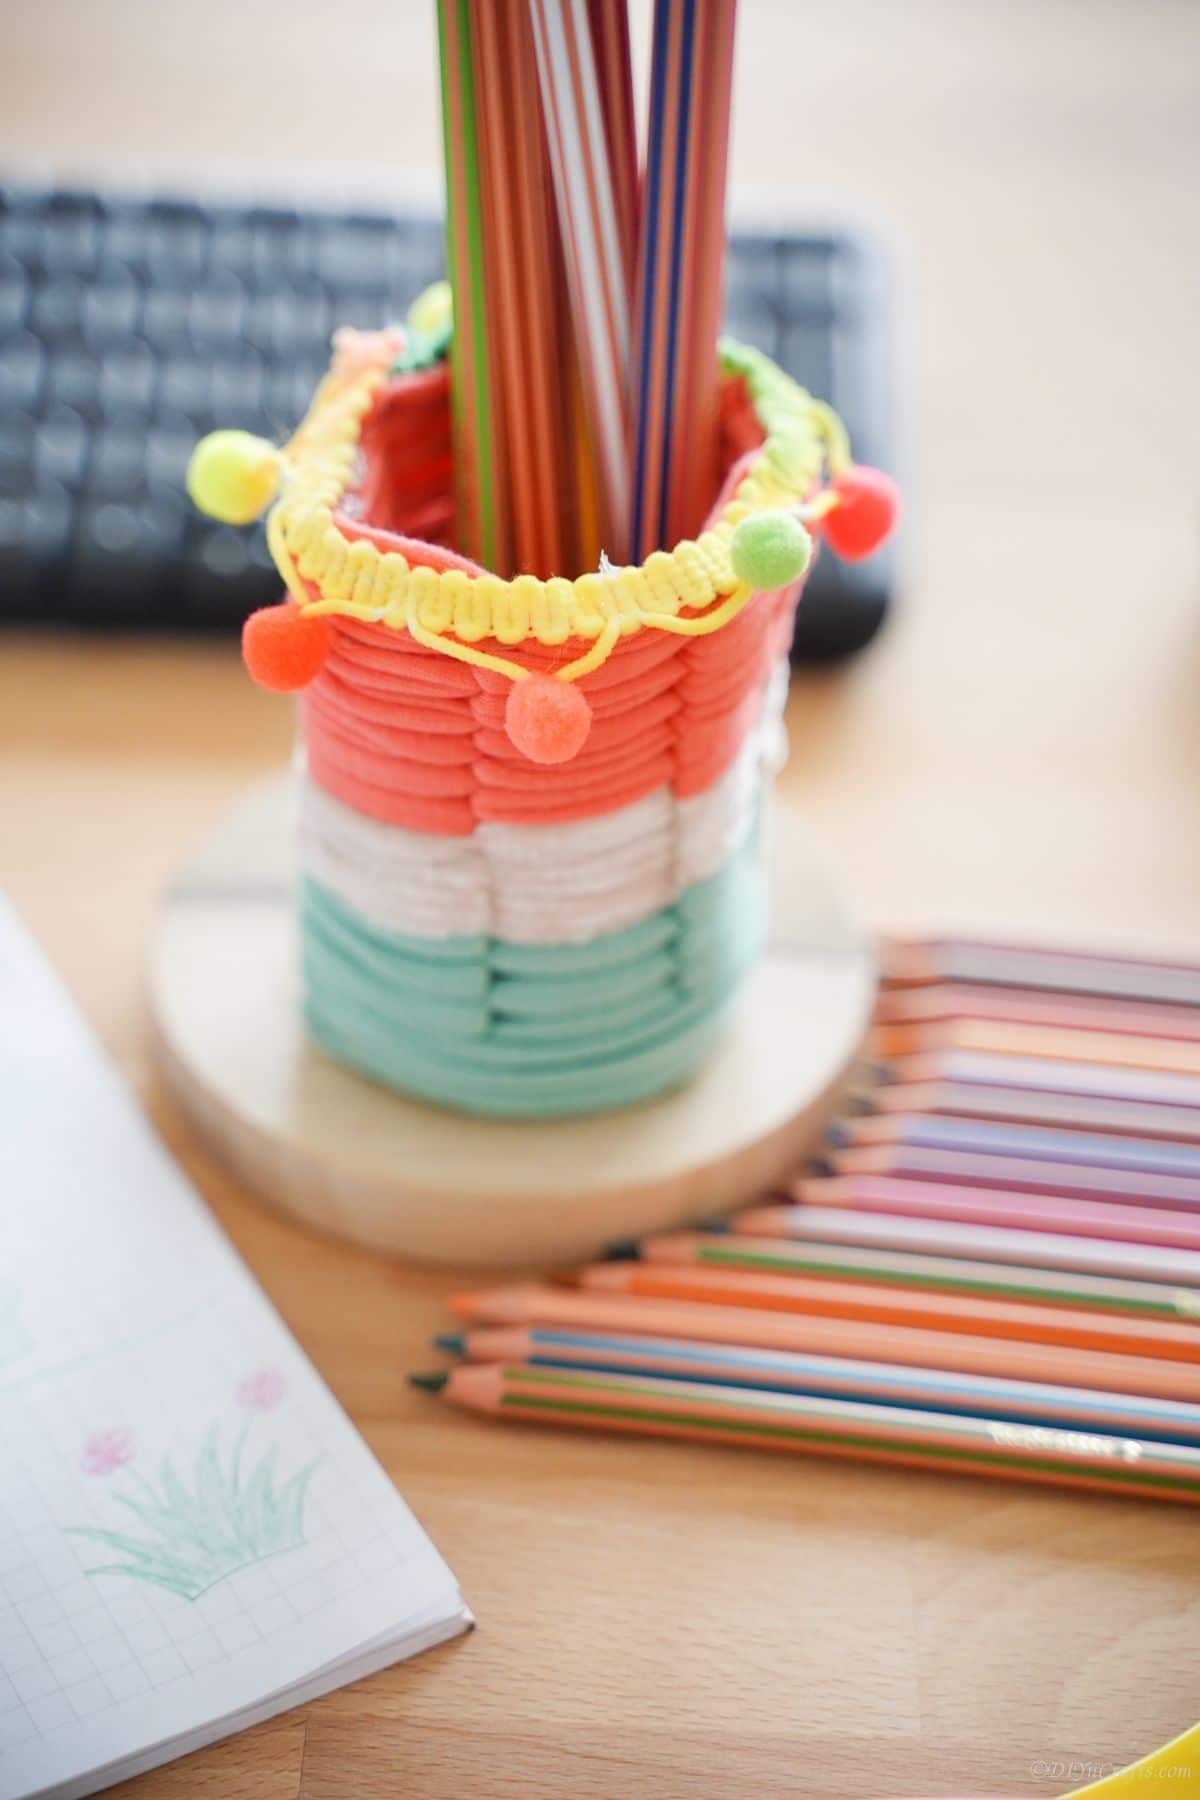 pencil holder on desk next to colored pencils